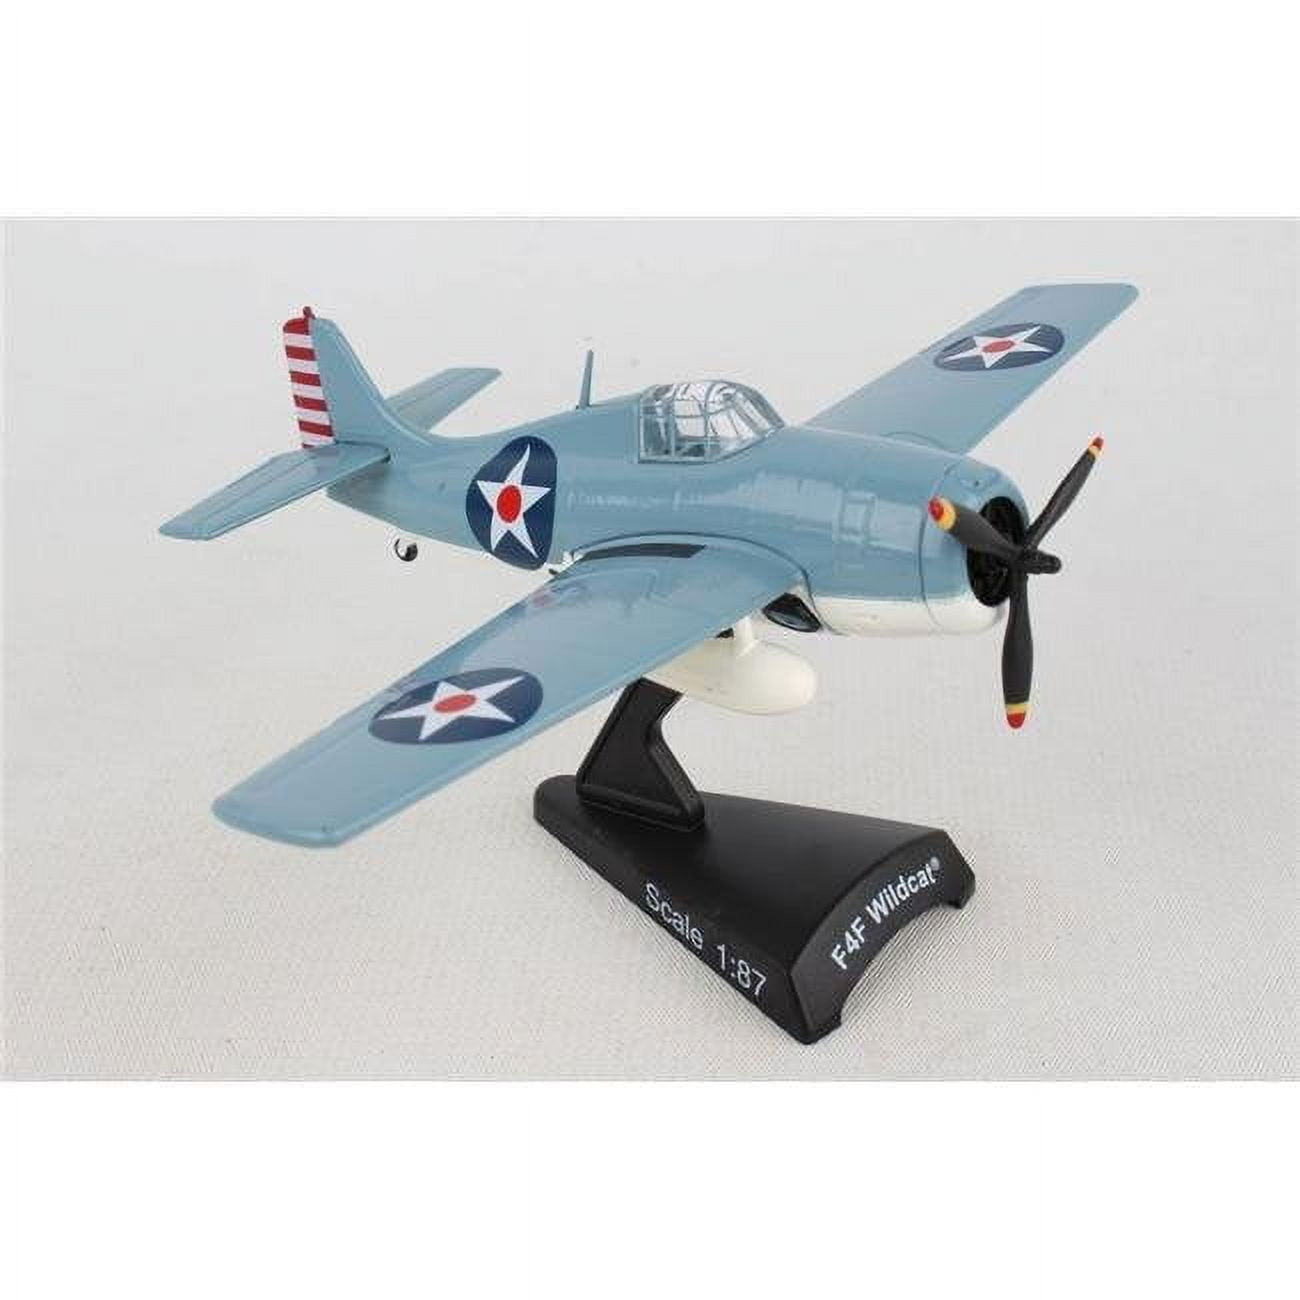 Picture of Postage Stamp Planes PS5351-2 1 by 87 Scale F4F Wildcat Model Aircraft